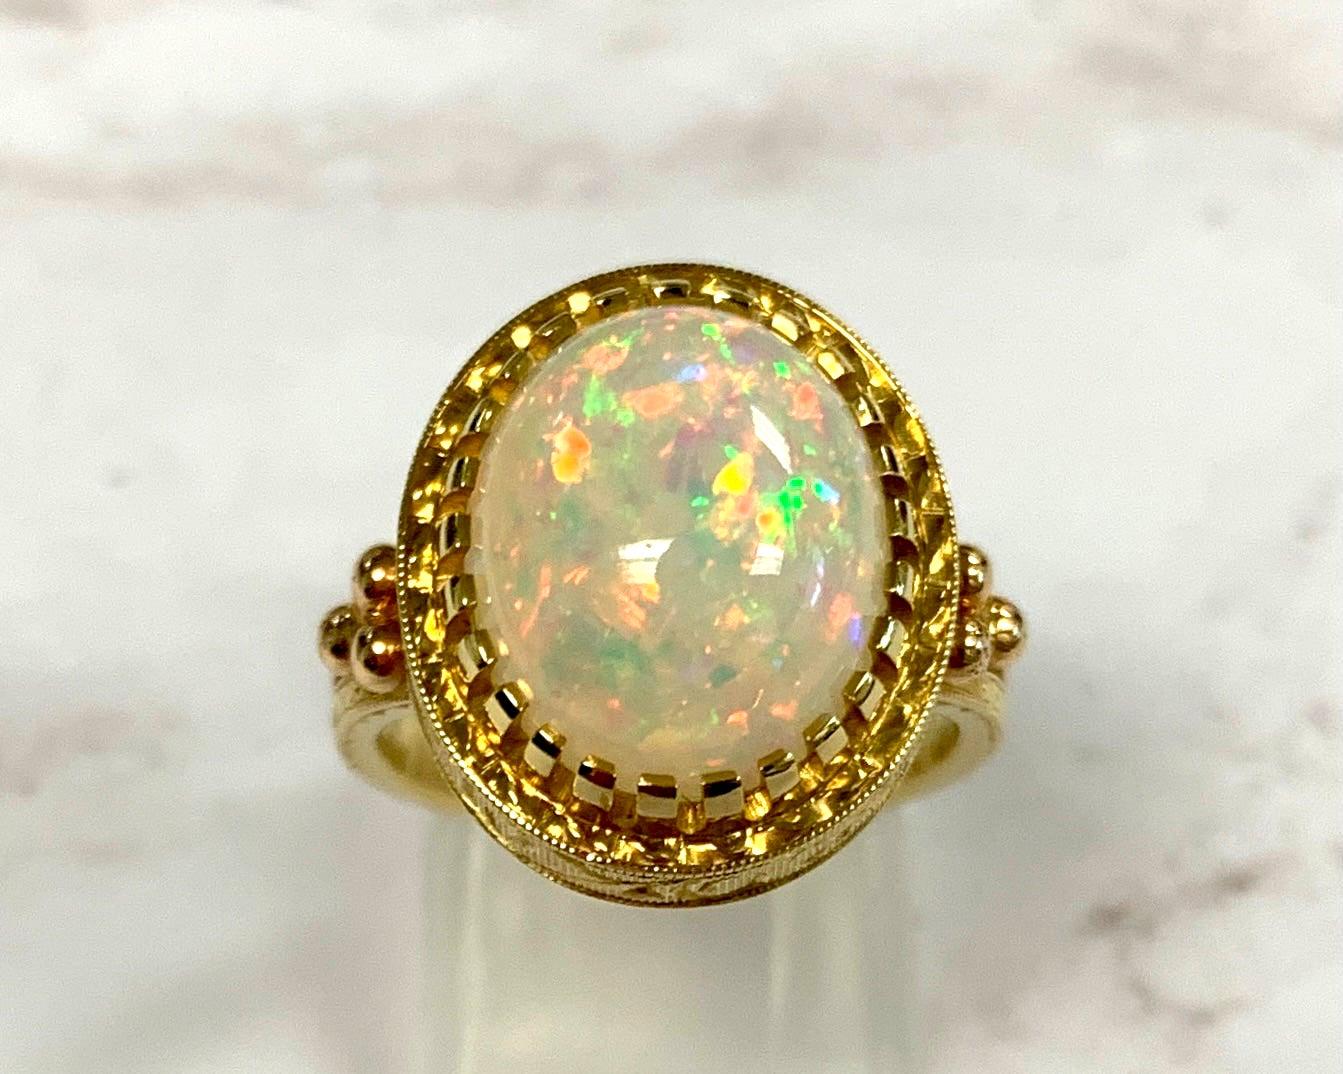 The 4.30 carat opal in this handmade 18k yellow gold ring is bursting with color! This gemstone displays flashes of bright green, orange, yellow, and the most highly-prized and rare color: red! It is difficult for photos to do this opal justice.